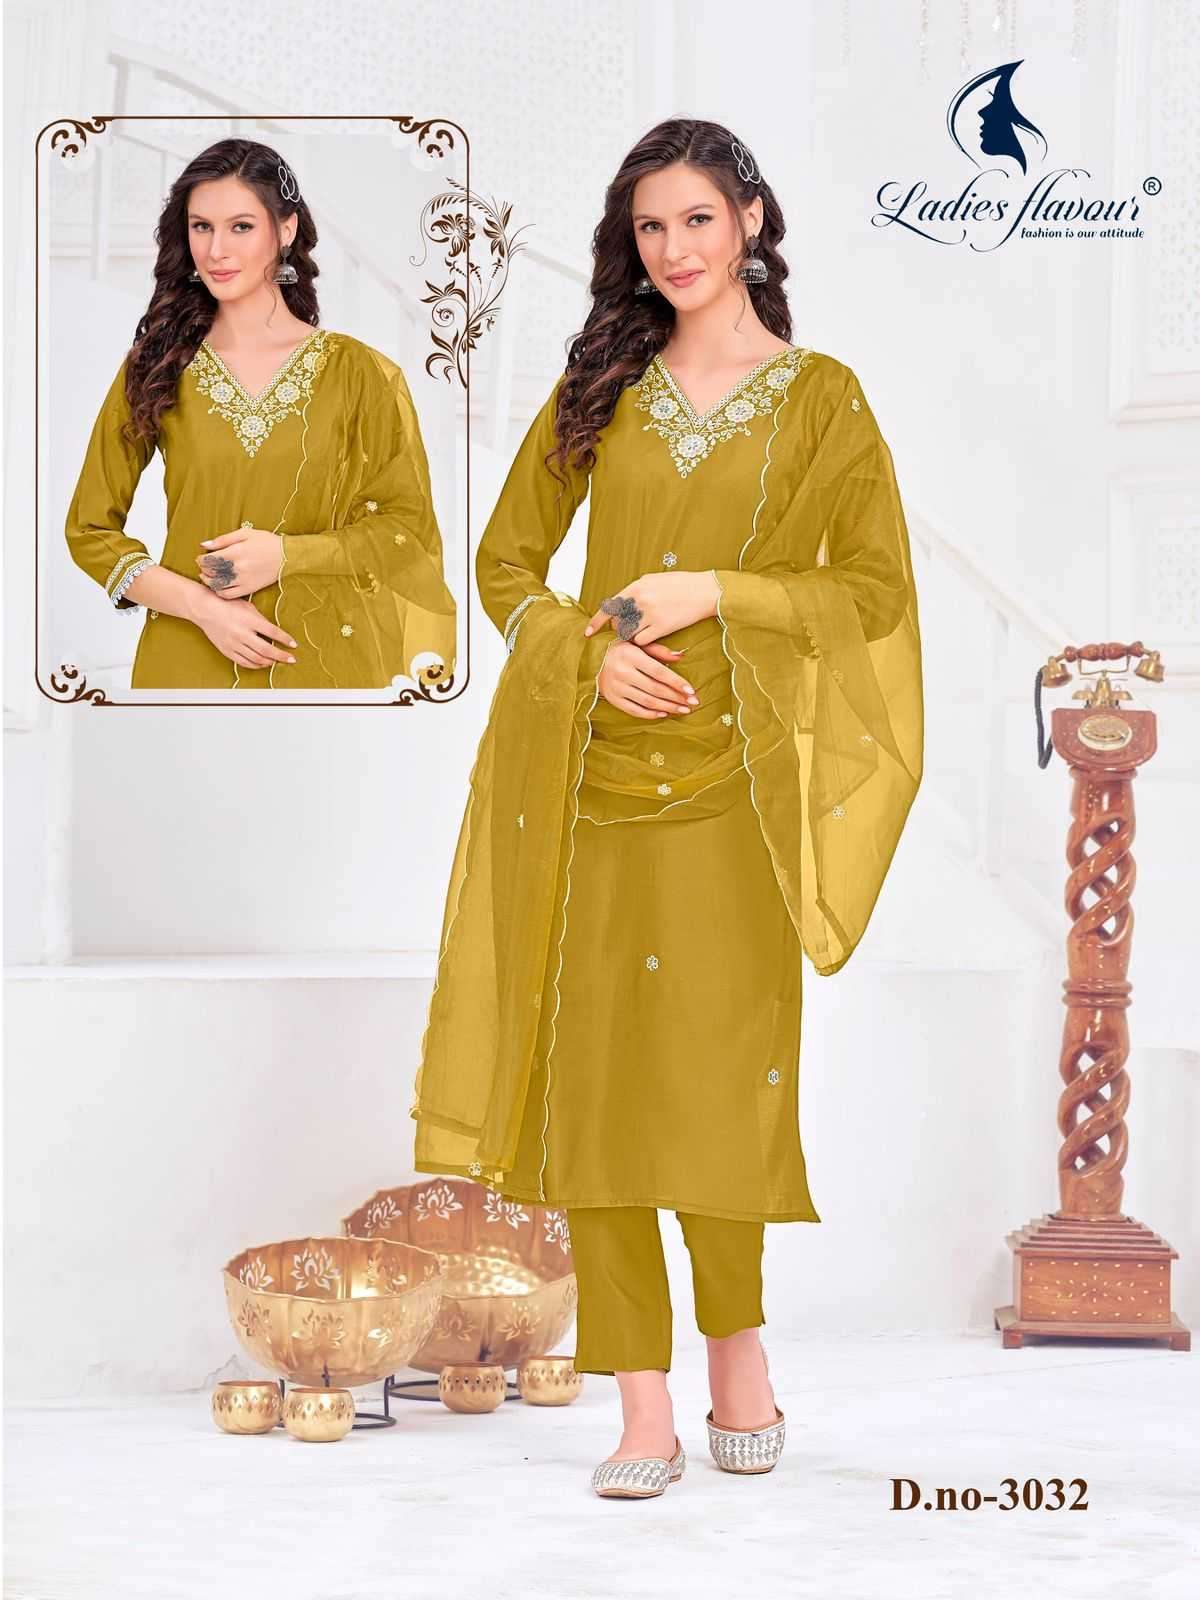 ladies flavour LF-3032-3033 Roman with Heavy Embroidery readymade suit 